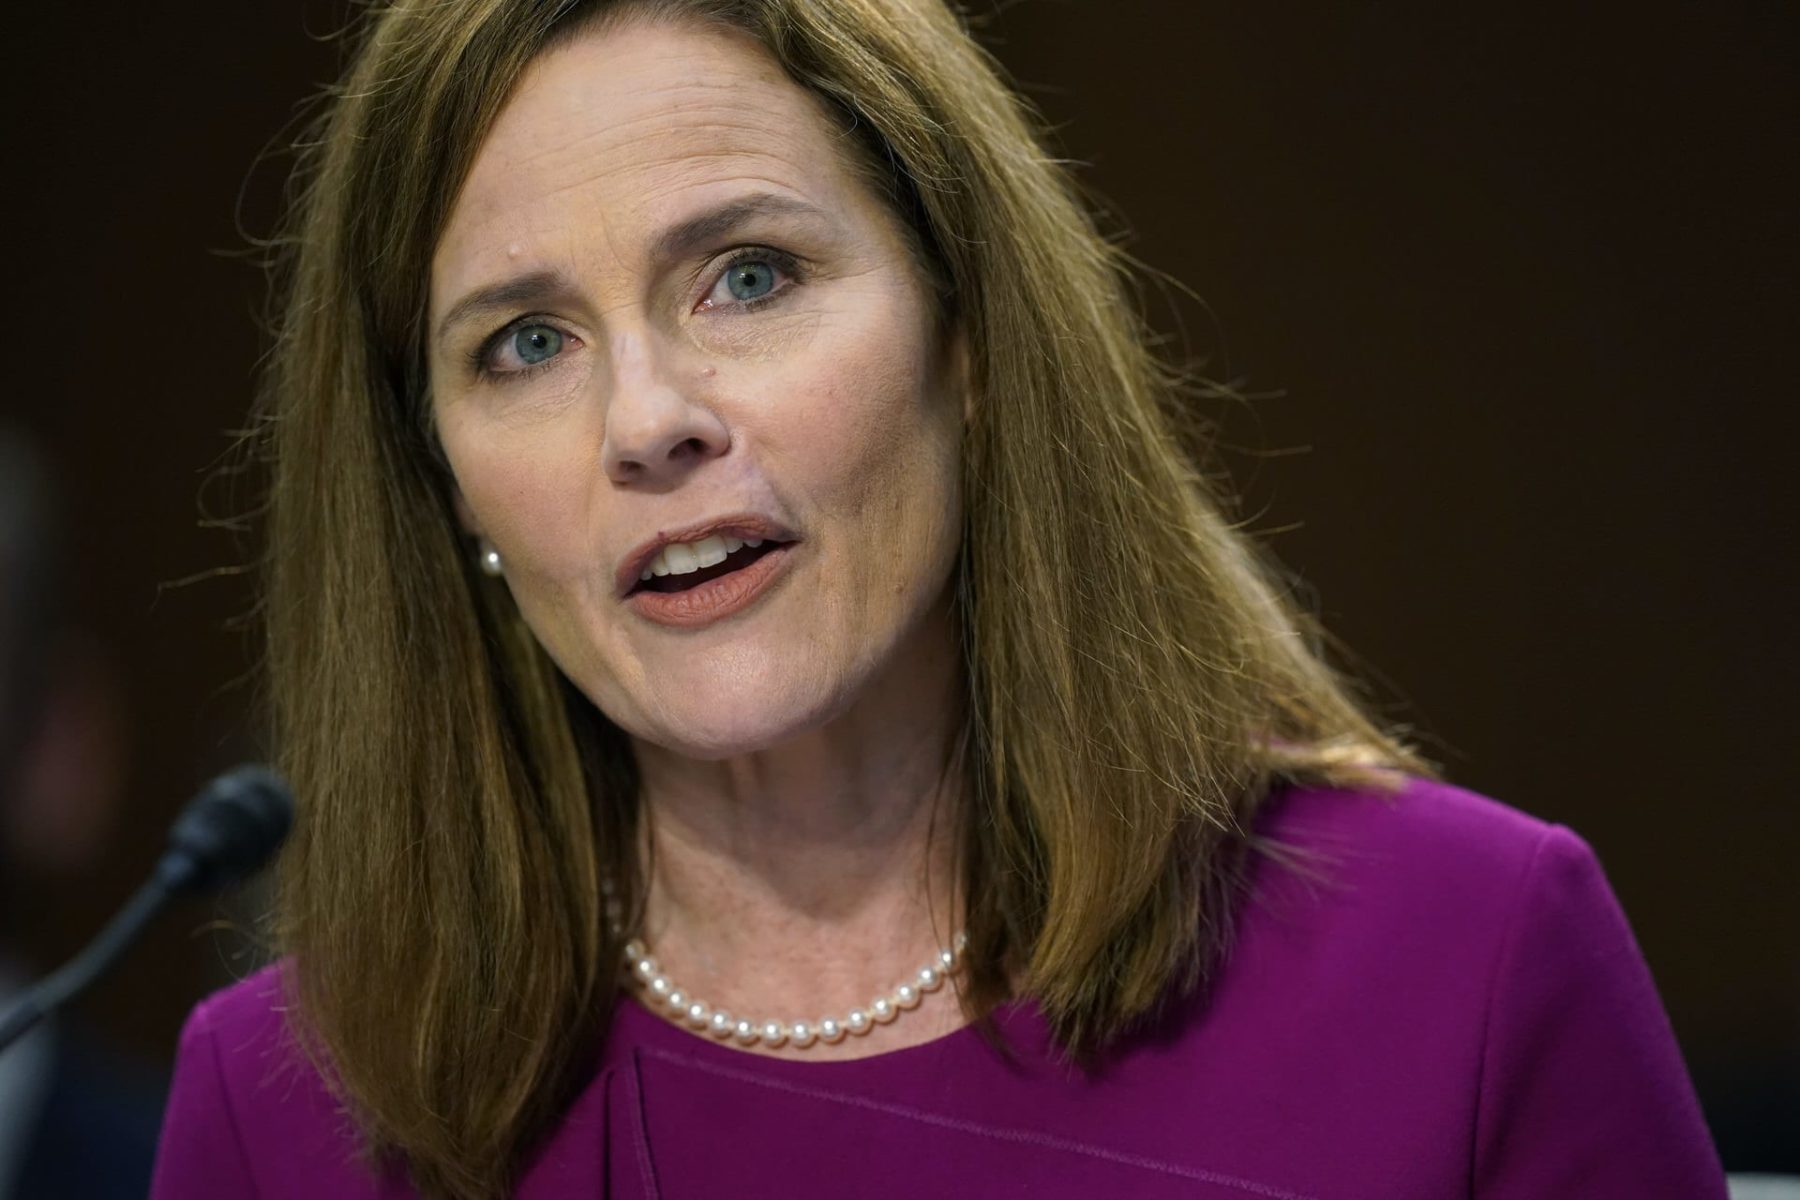 Amy Coney Barrett speaks at the first day of her confirmation hearing.